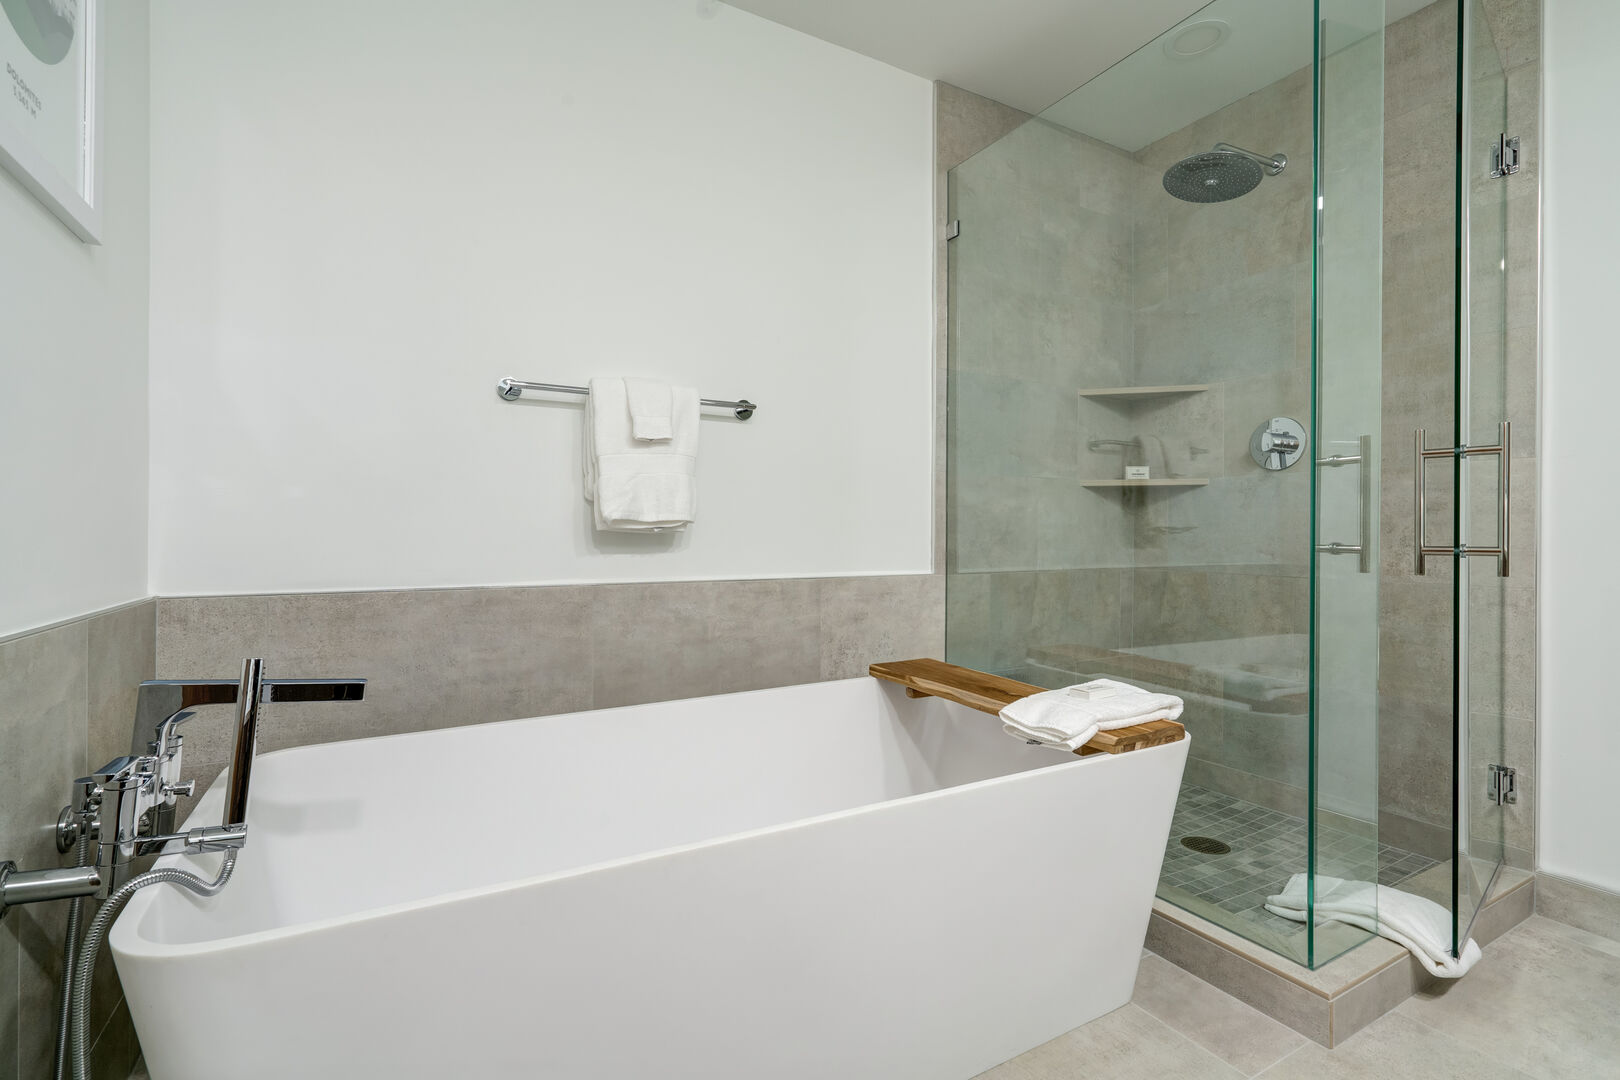 Primary bathtub and shower.